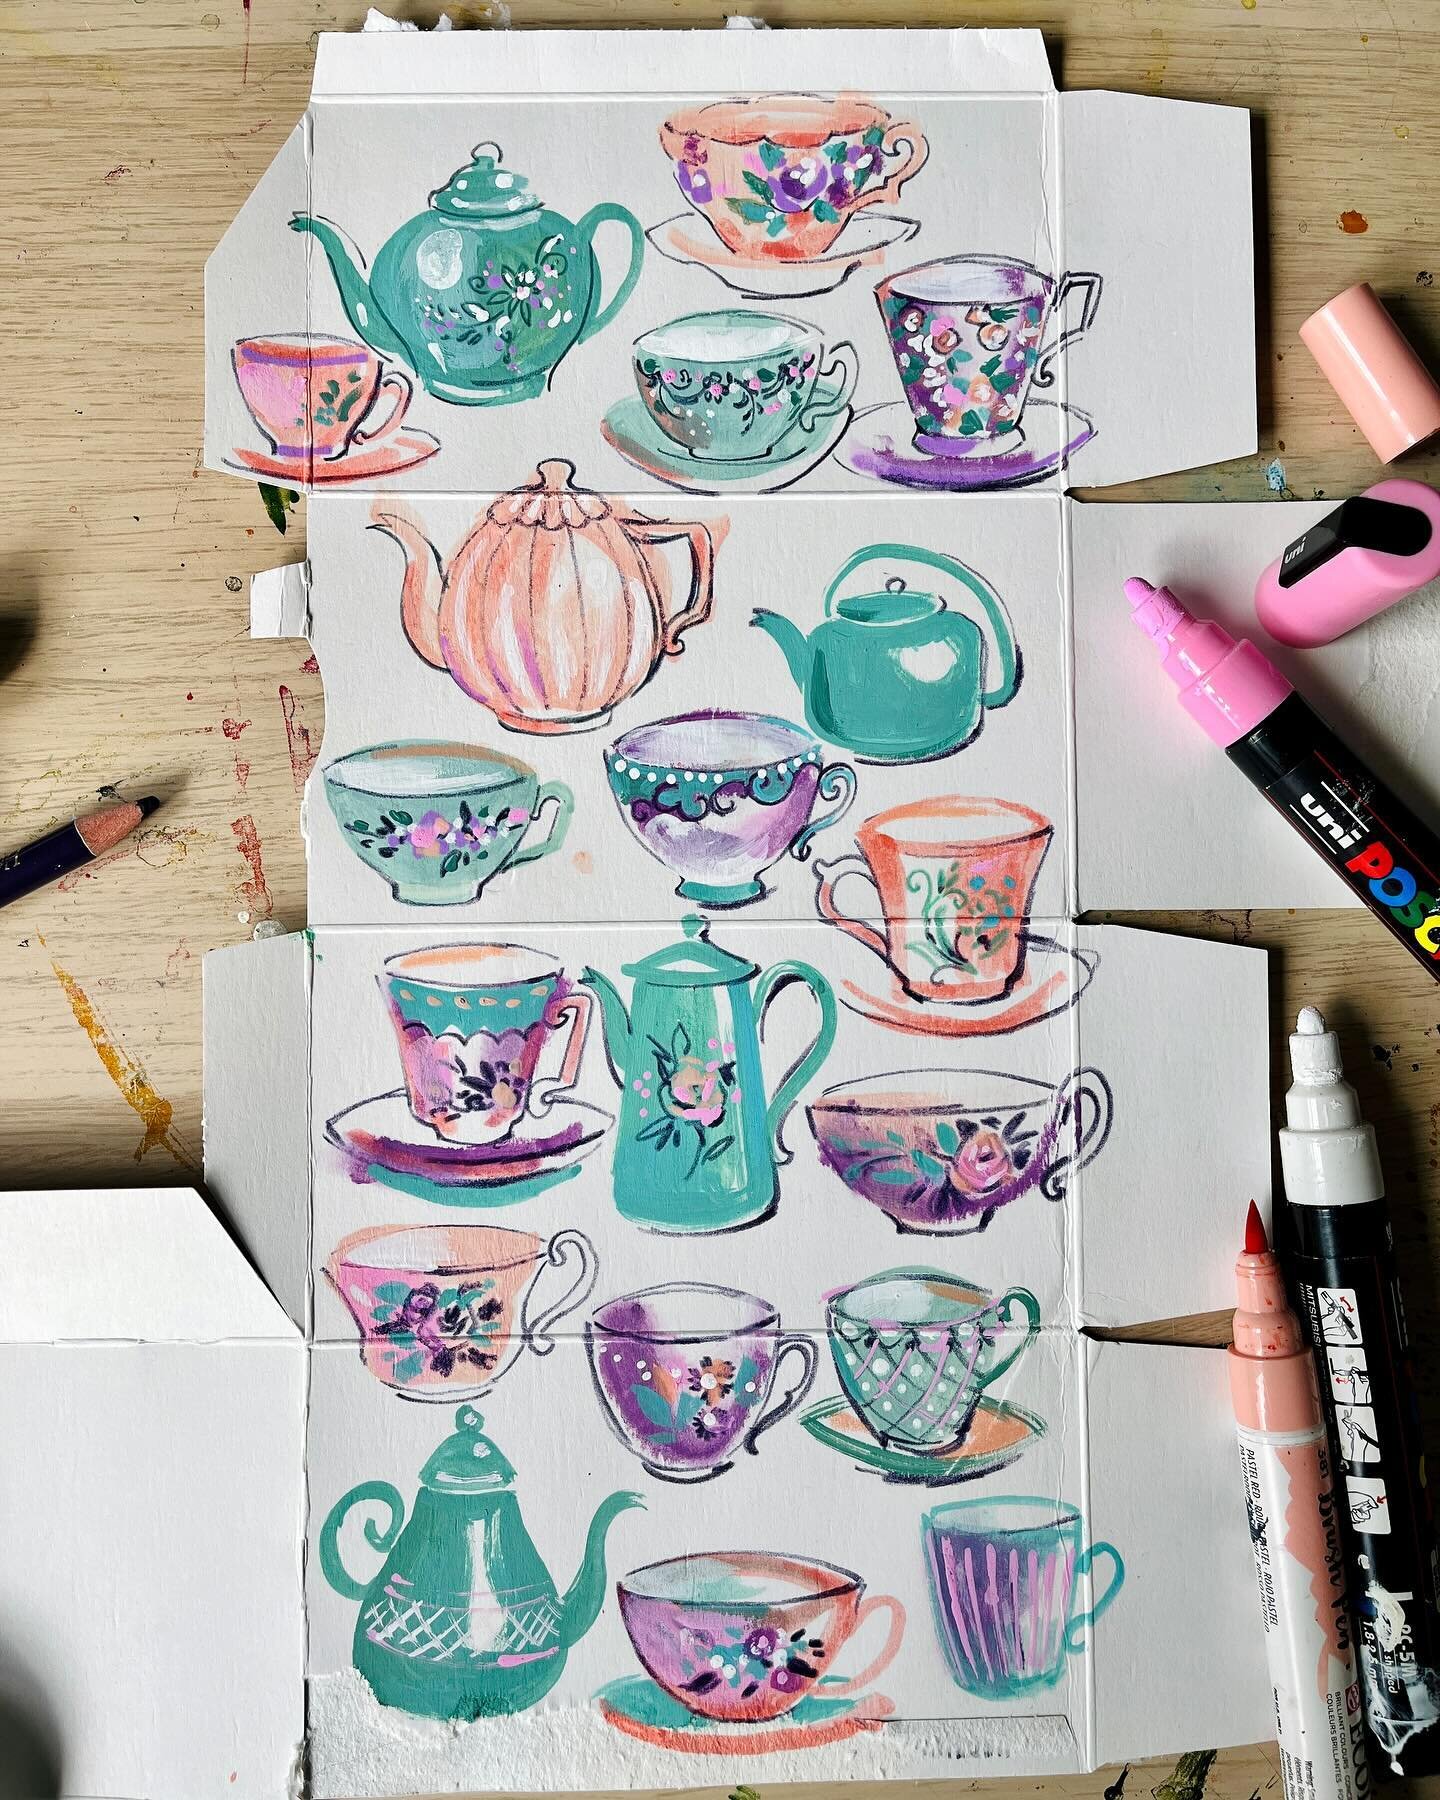 ☕️This month, I&rsquo;m thrilled to share my creative process, which involves transforming everyday packaging, like this @twiningsuk Earl Grey tea box, into art. 🫖On Monday, Patreon members will have exclusive access to a full-length video where I d